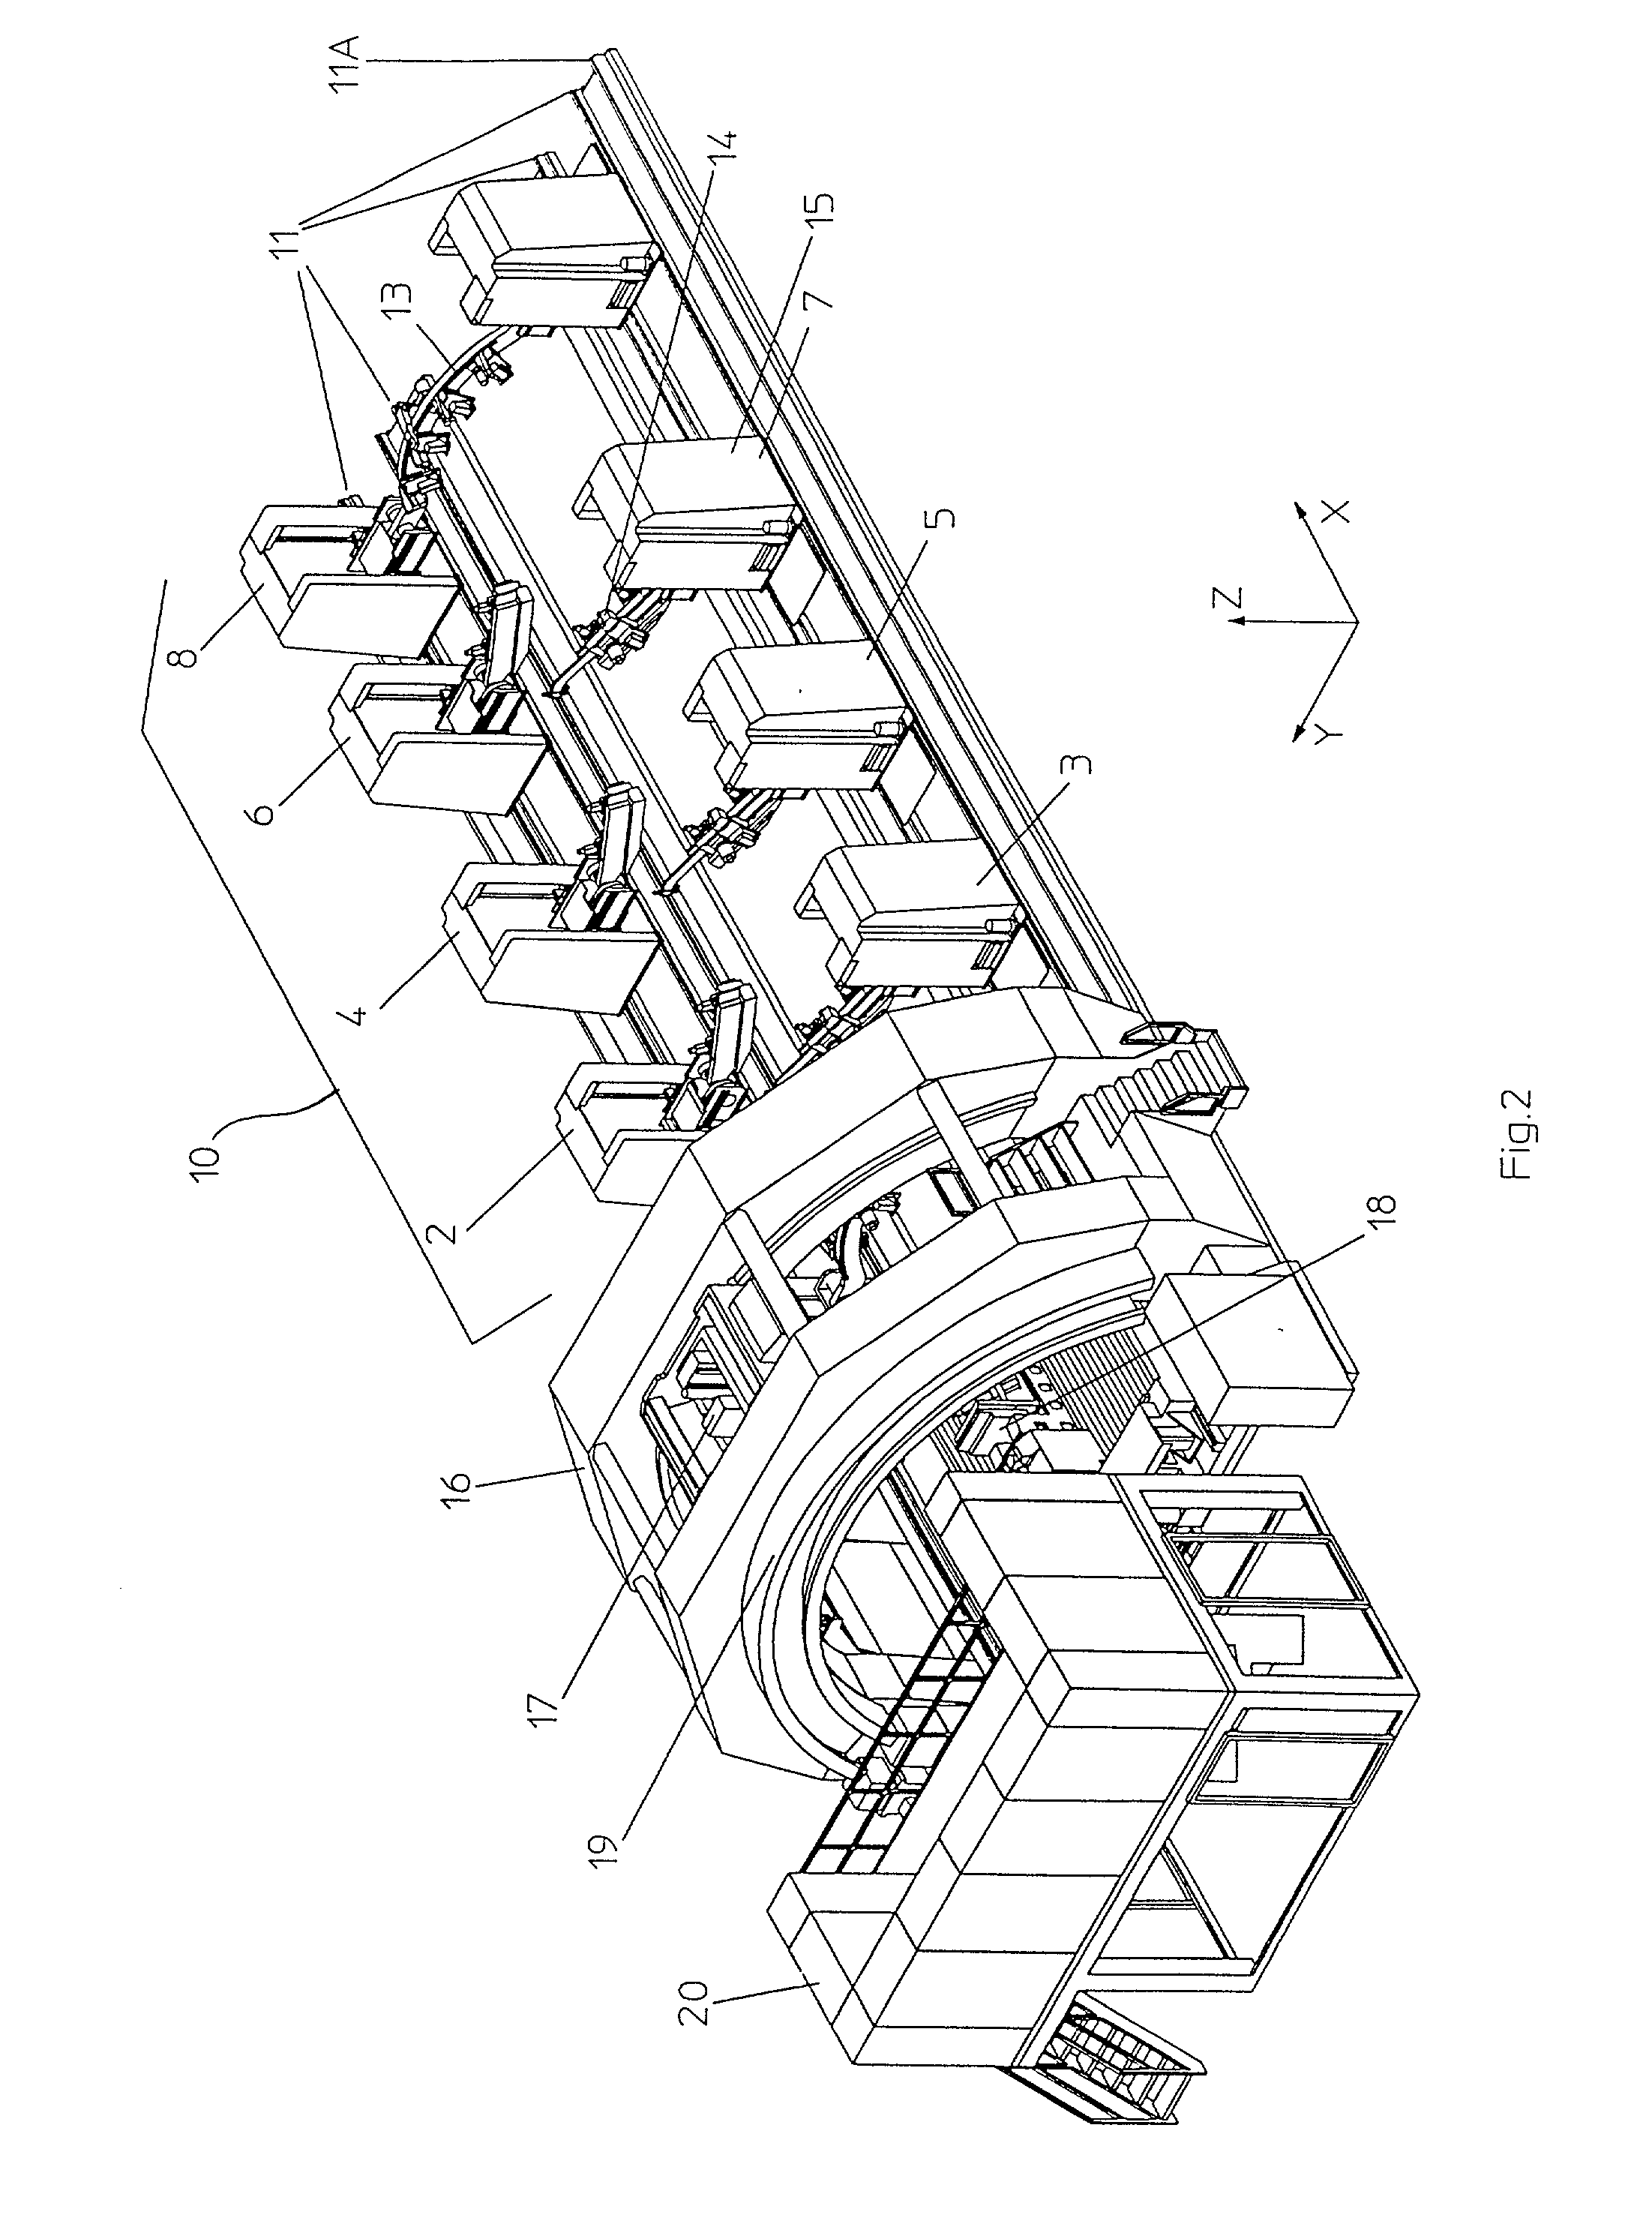 Versatile adaptable holding apparatus for holding large format workpieces